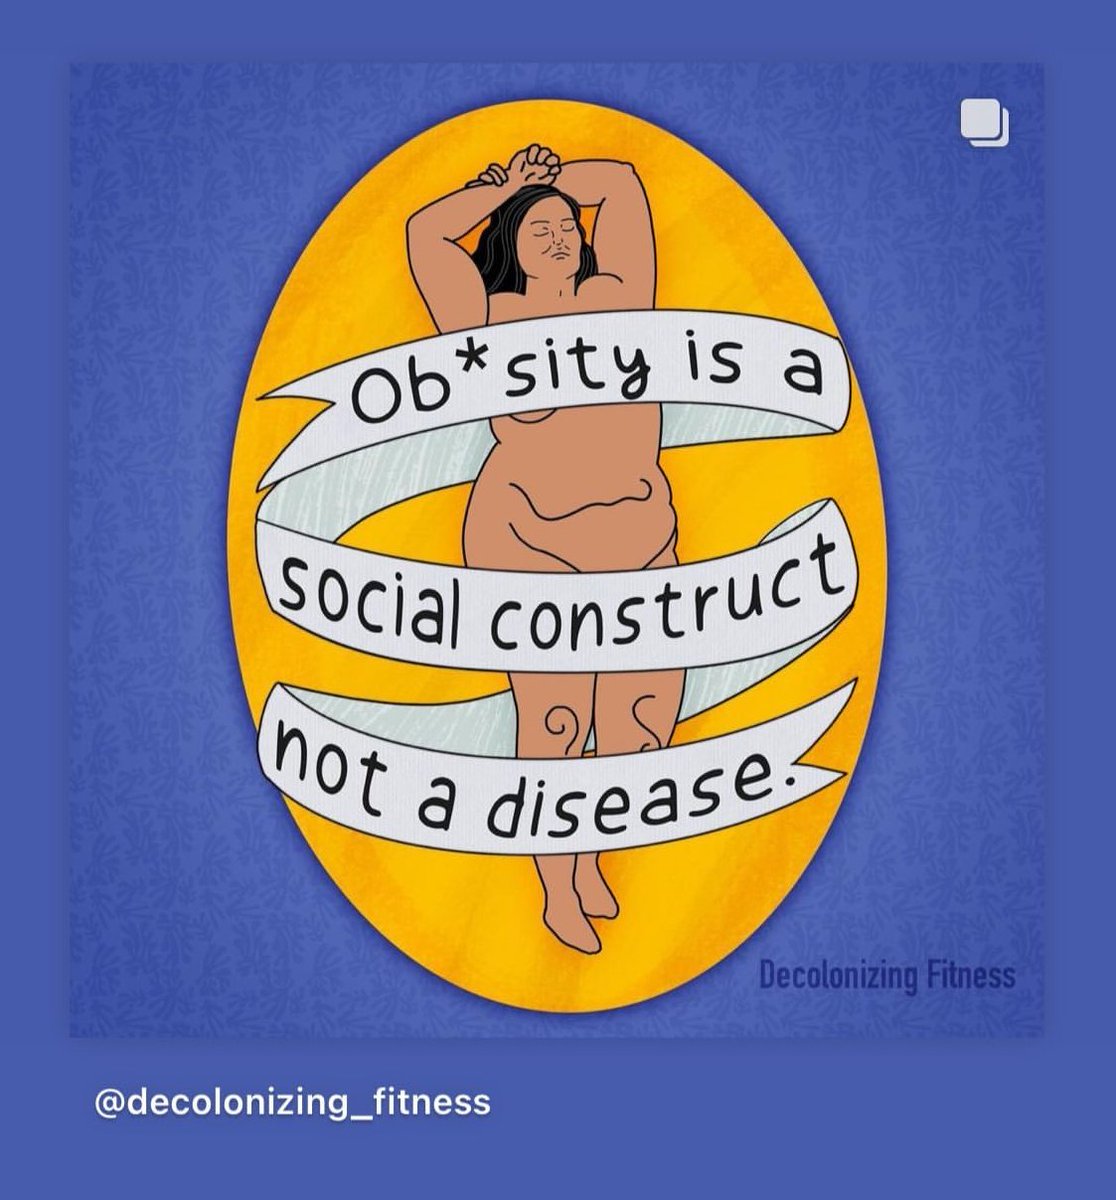 Fat activists can't even spell out the word 'obesity' because they think it's triggering. And the extra person's worth of body weight you're carrying definitely *isn't* a social construct. Put the fork down!